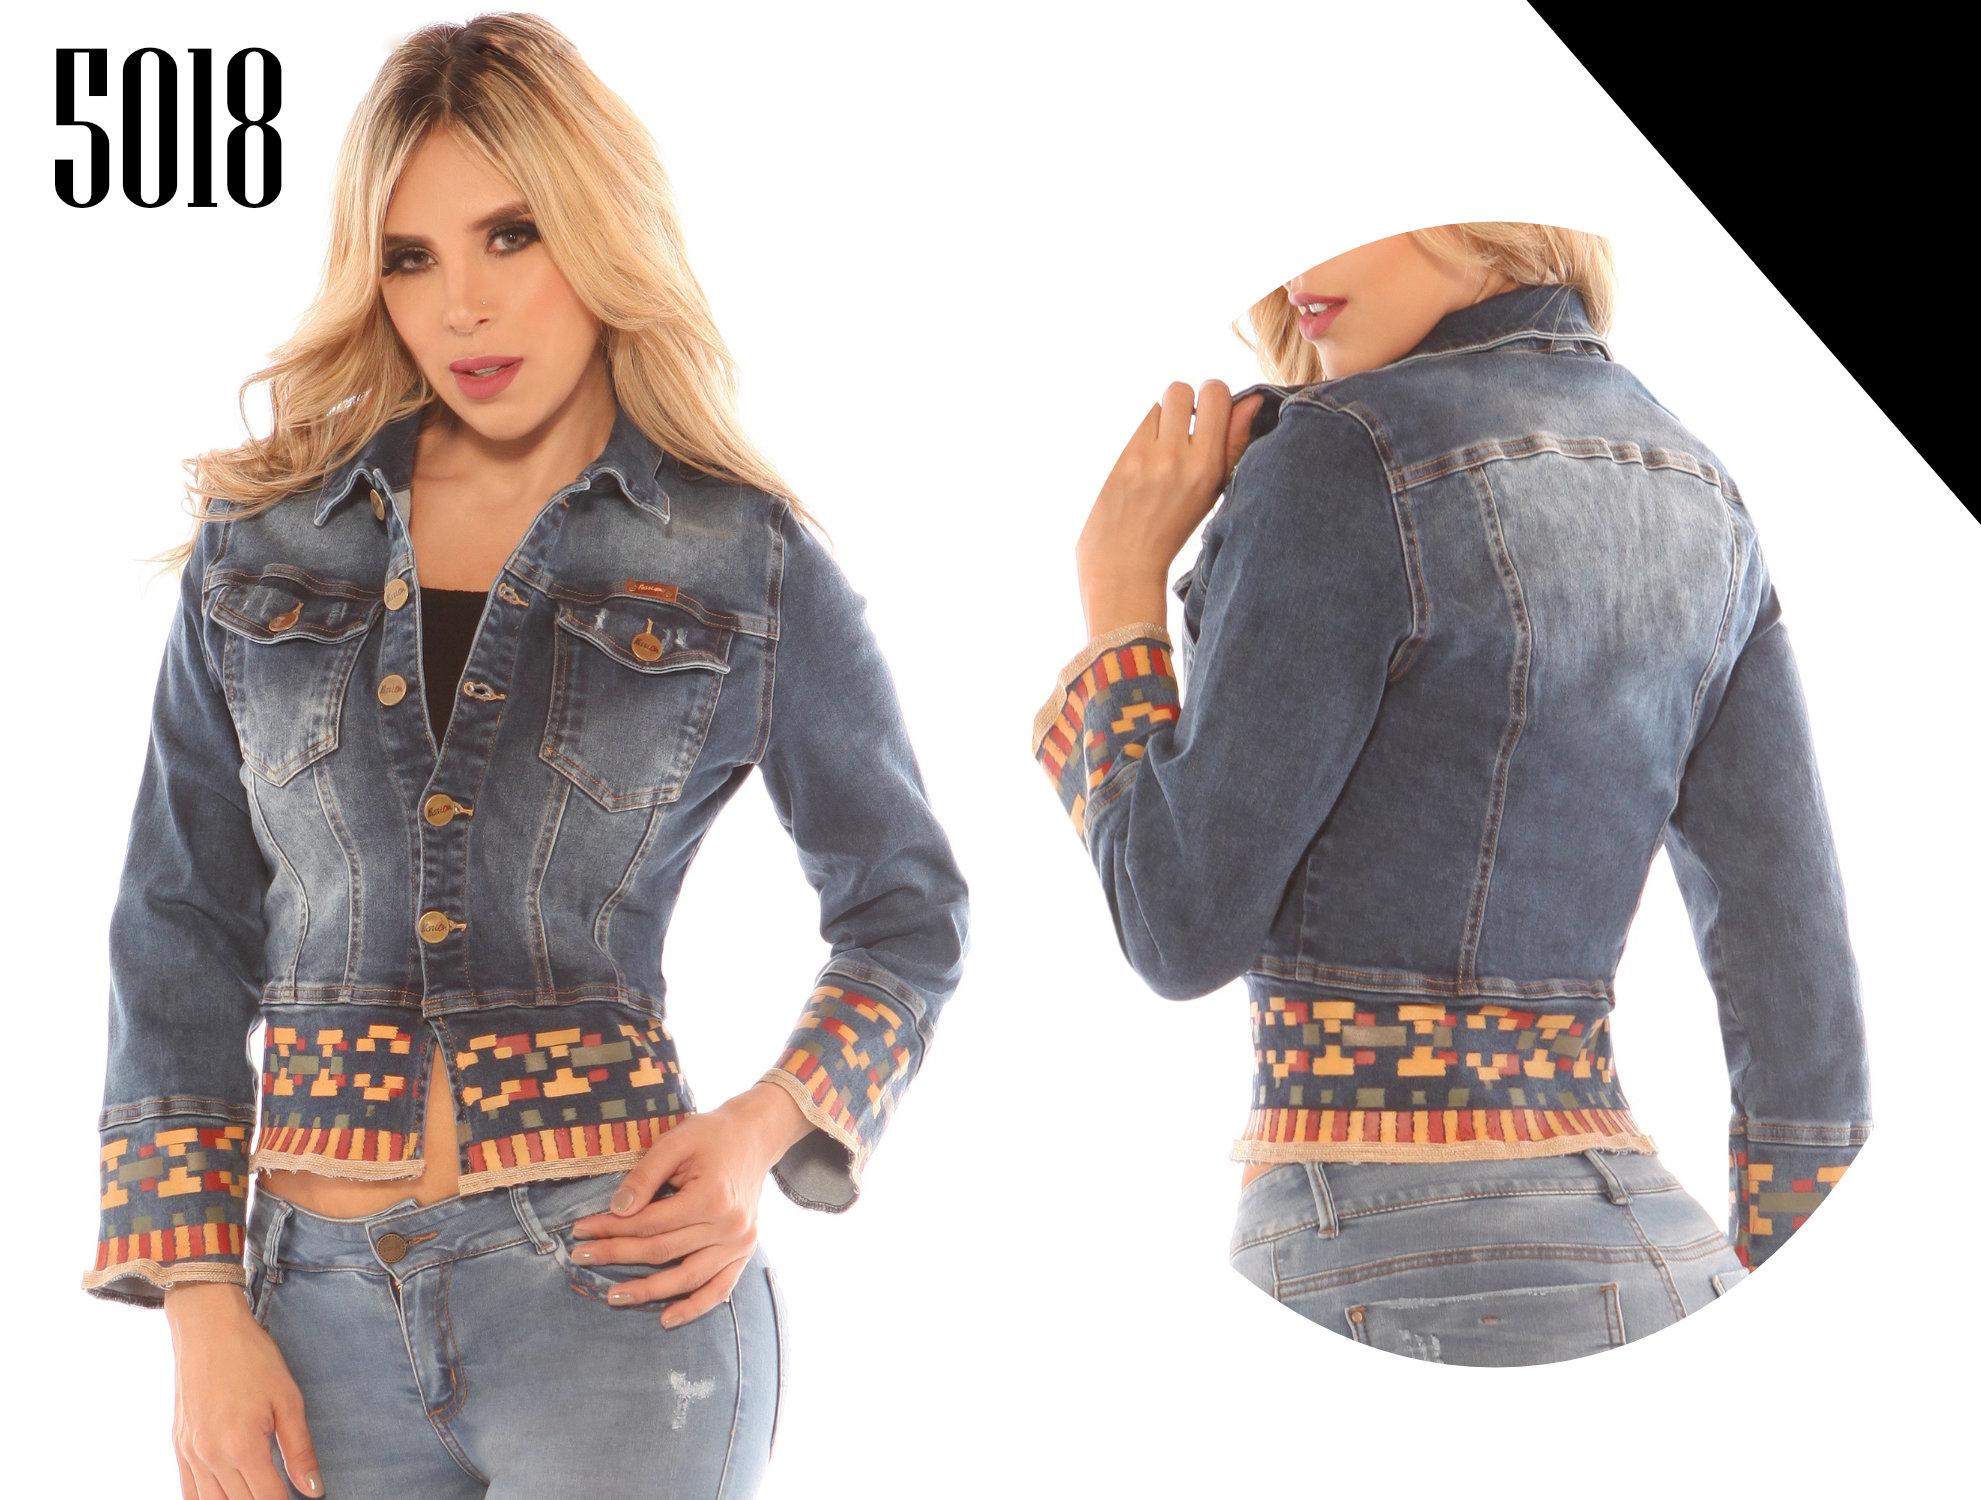 Indie Fashion Denim Jacket made in Colombia with Decorative Wear